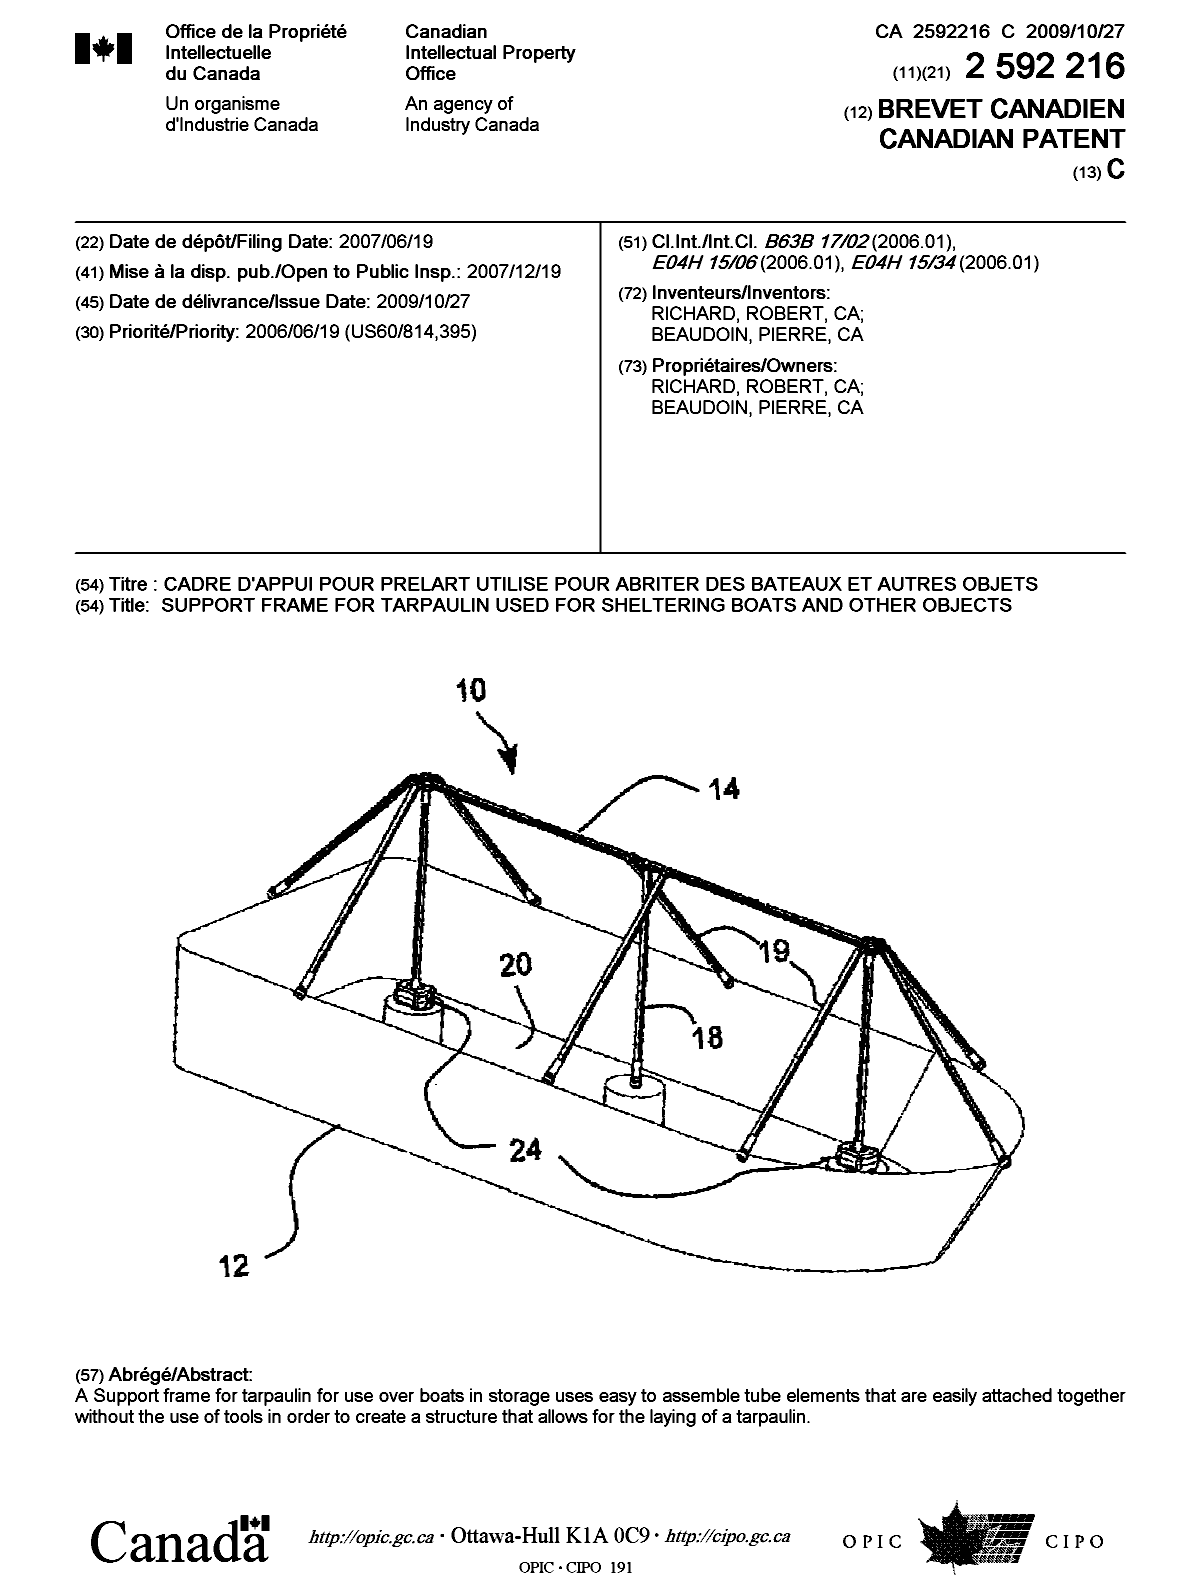 Canadian Patent Document 2592216. Cover Page 20091006. Image 1 of 1